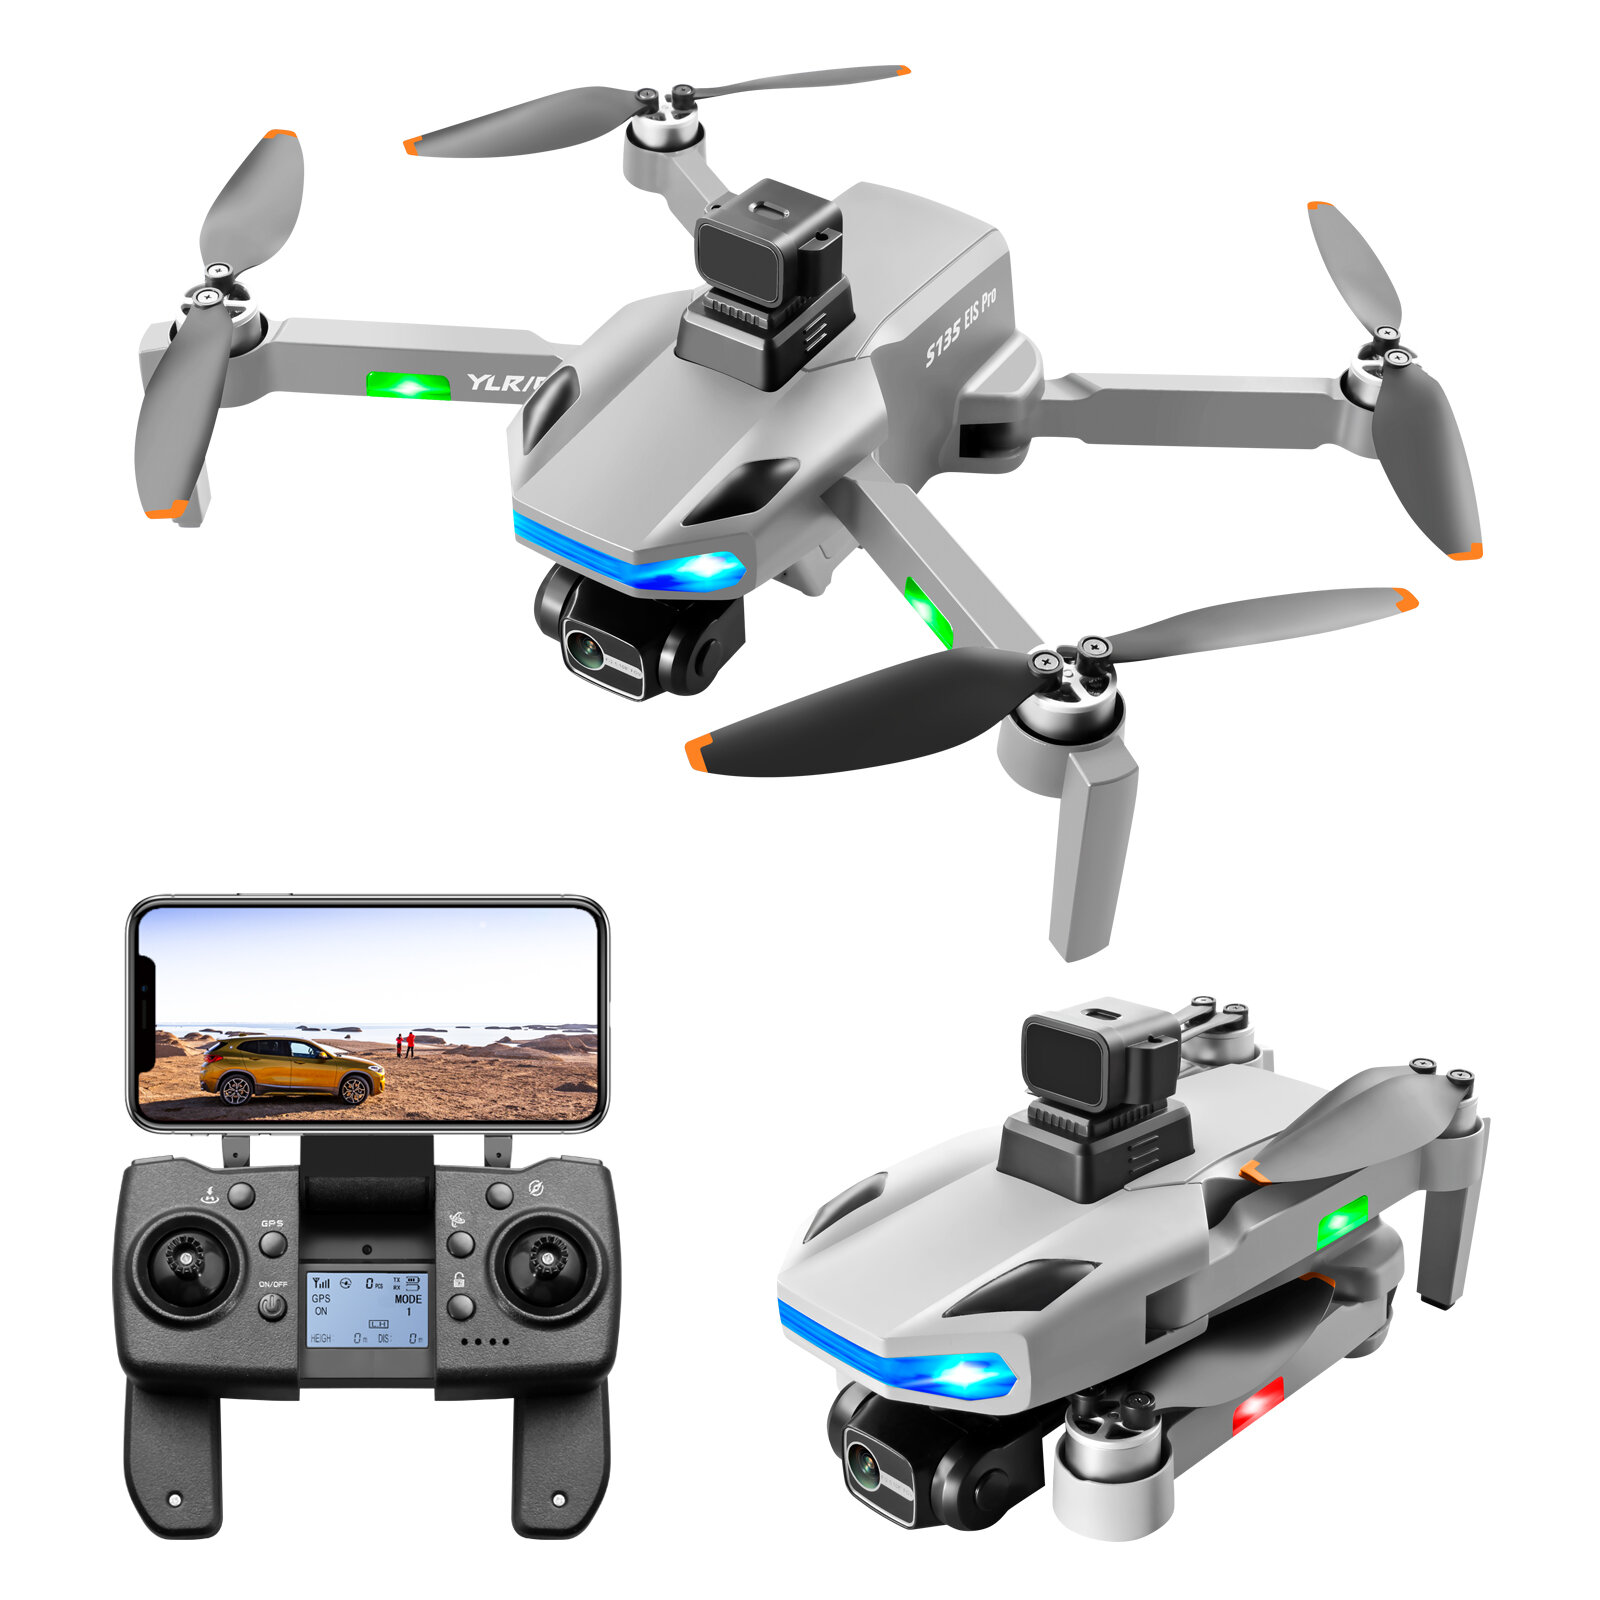 YLR/C S135 GPS 5G WiFi FPV with 8K HD ESC Dual Camera 3-Axis EIS Gimbal 360° Obstacle Avoidance Brushless Foldable RC Drone Quadcopter RTF COD